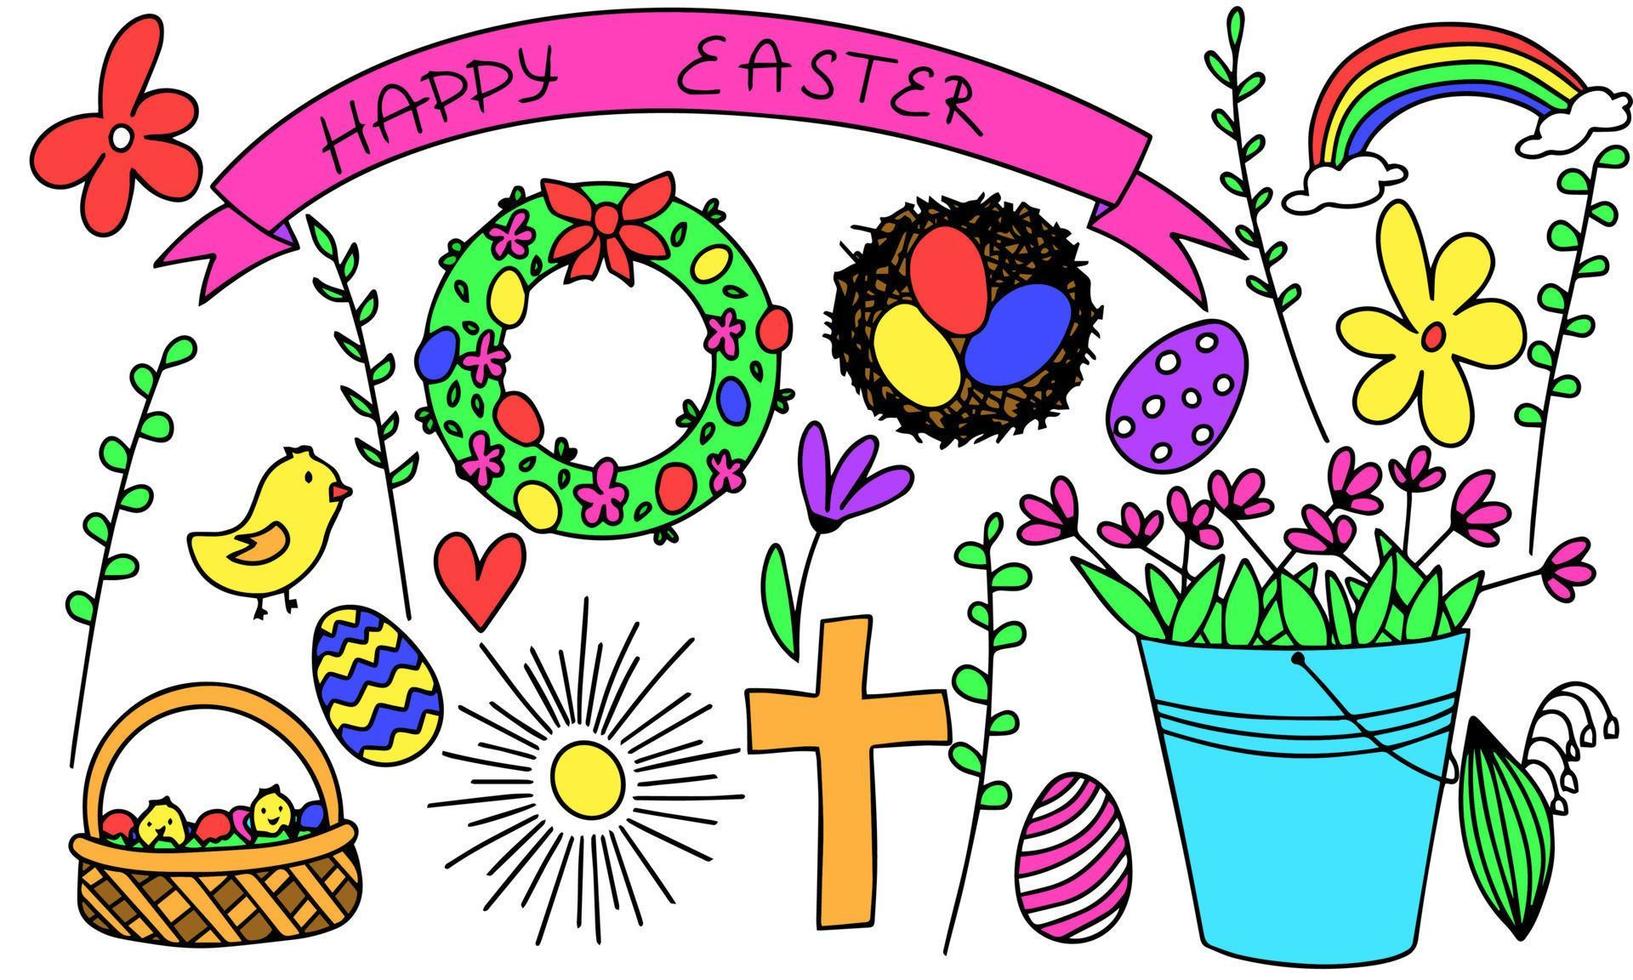 Doodle symbol of Easter. Eggs, flowers, happy Easter, rainbow, chick, sun. Vector illustration.